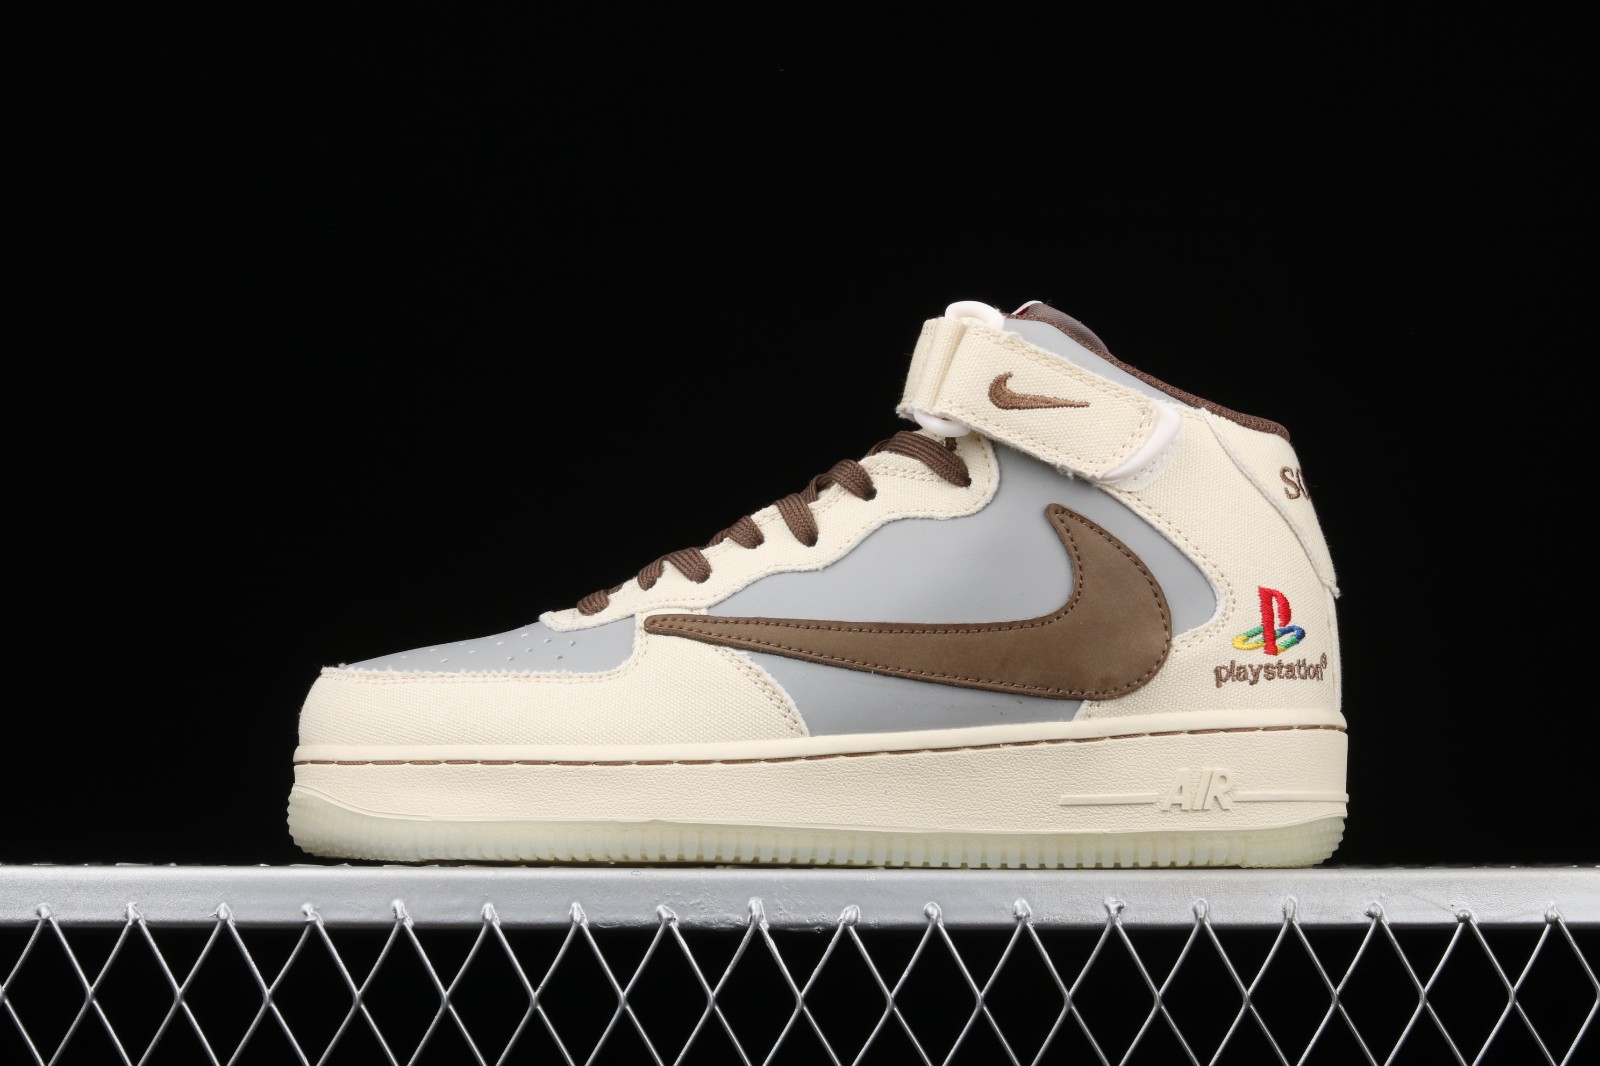 geeuwen vezel botsen Travis Scott x Sony Play Station 5 x Nike Air Force 1 07 TS PS5 Mid Beige  Grey Brown BQ5828 - Sepsale - Nike SB has expanded their Bruin React lineup  with